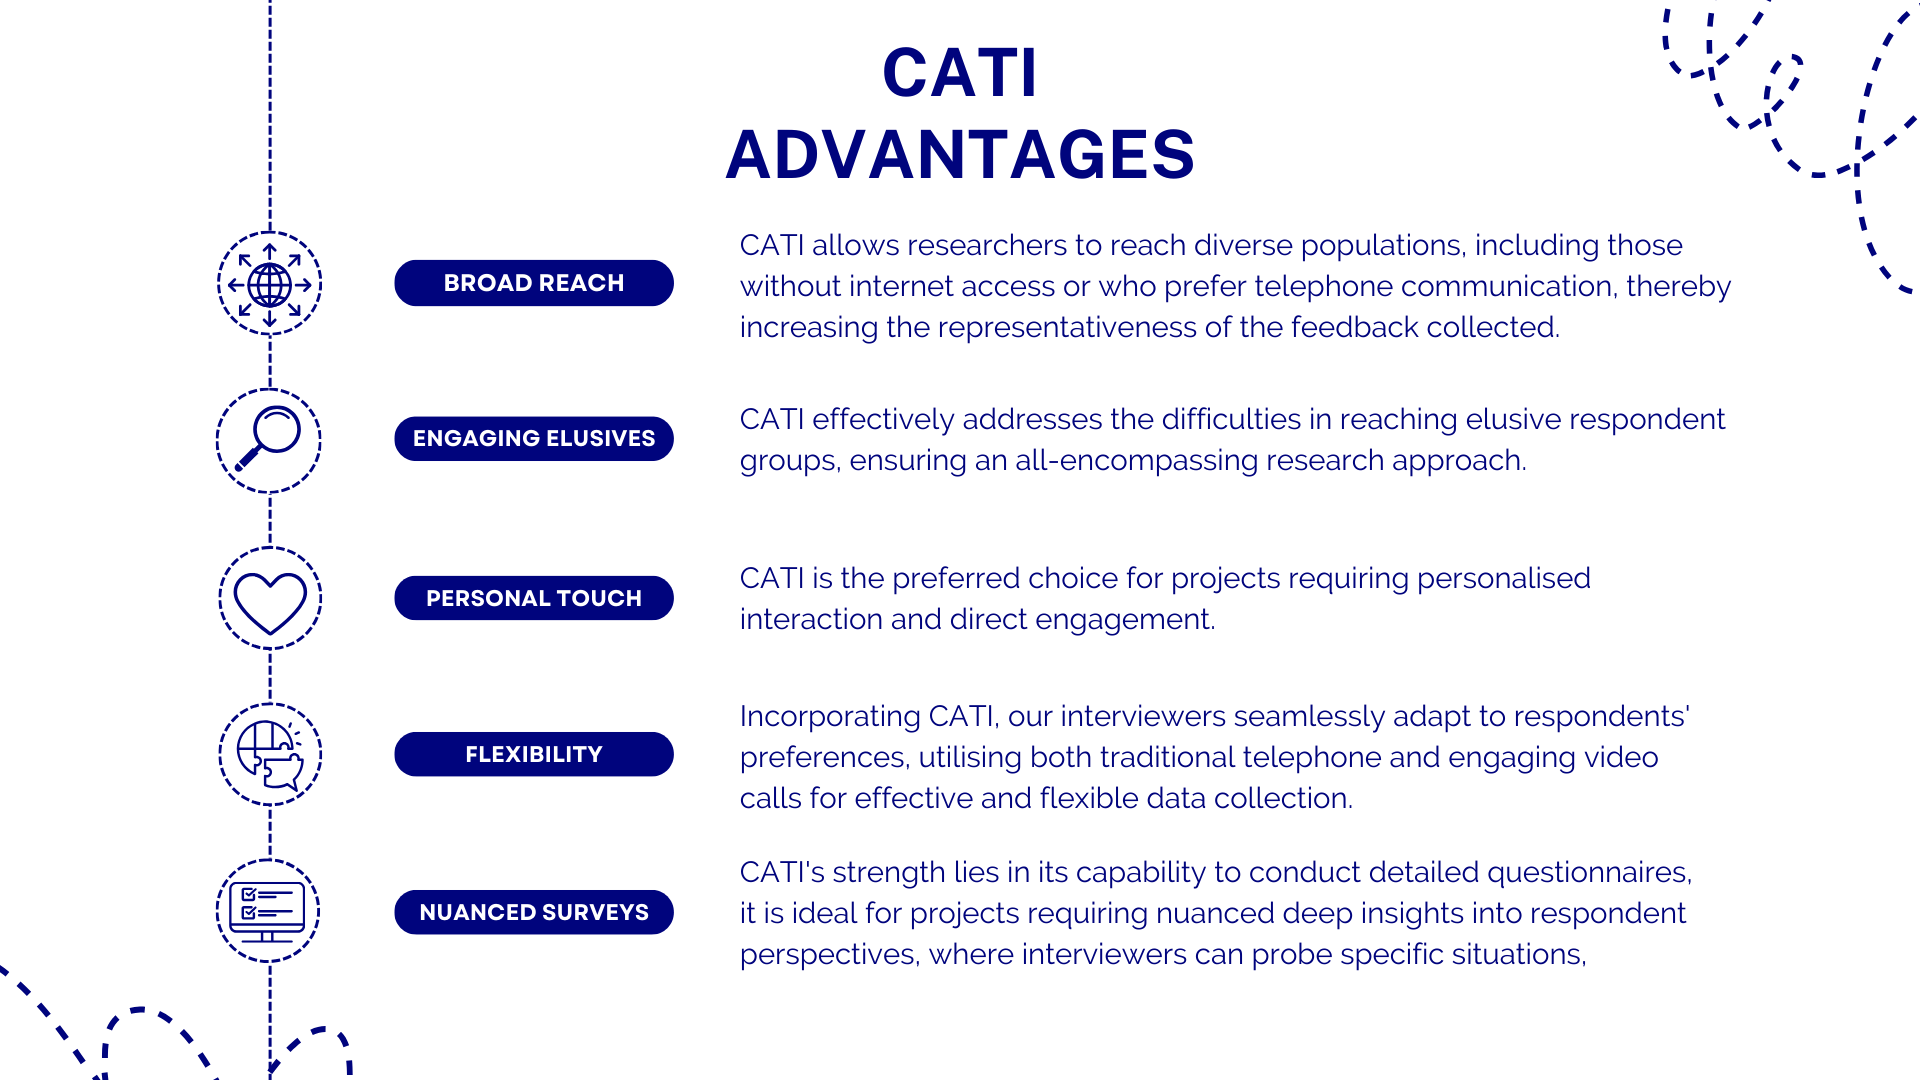 CATI advantages: broad reach, engaging elusives, personal touch, flexibility, nuanced surveys.